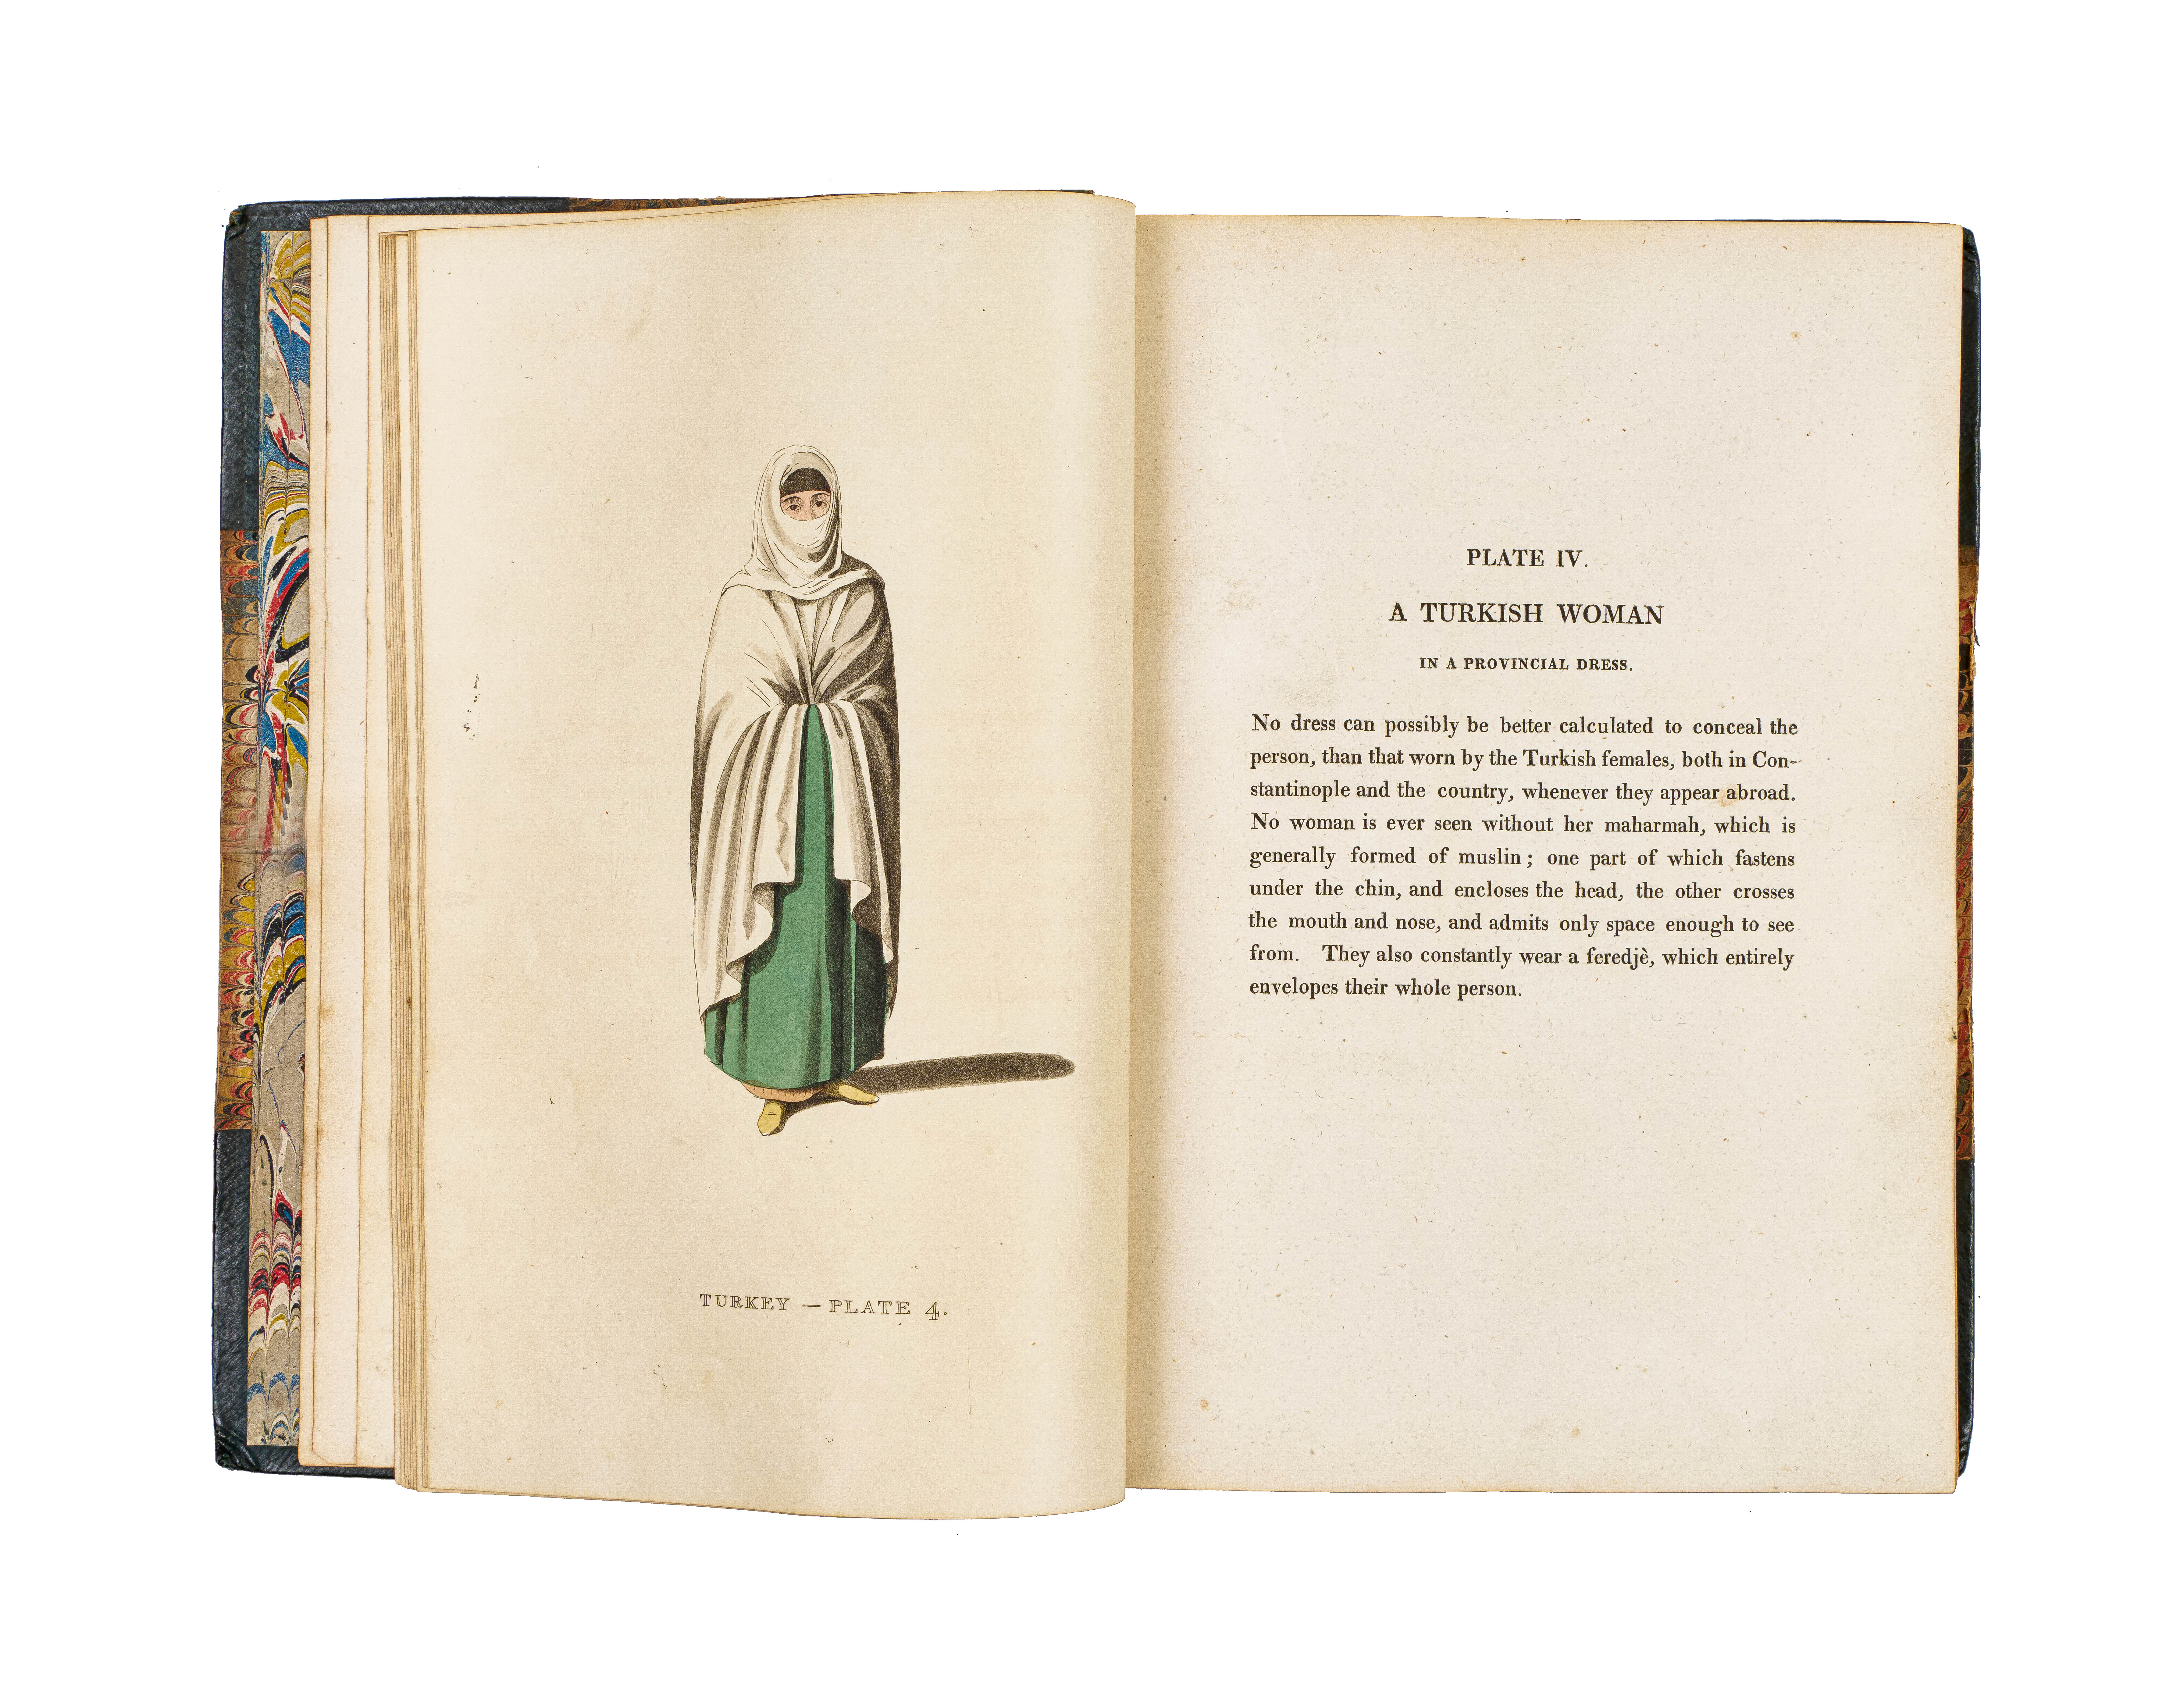 COSTUMES TURKEY, PICTURESQUE REPRESENTATIONS OF THE DRESS AND MANNERS OF THE TURKS, JOHN MURRAY, LON - Image 3 of 8